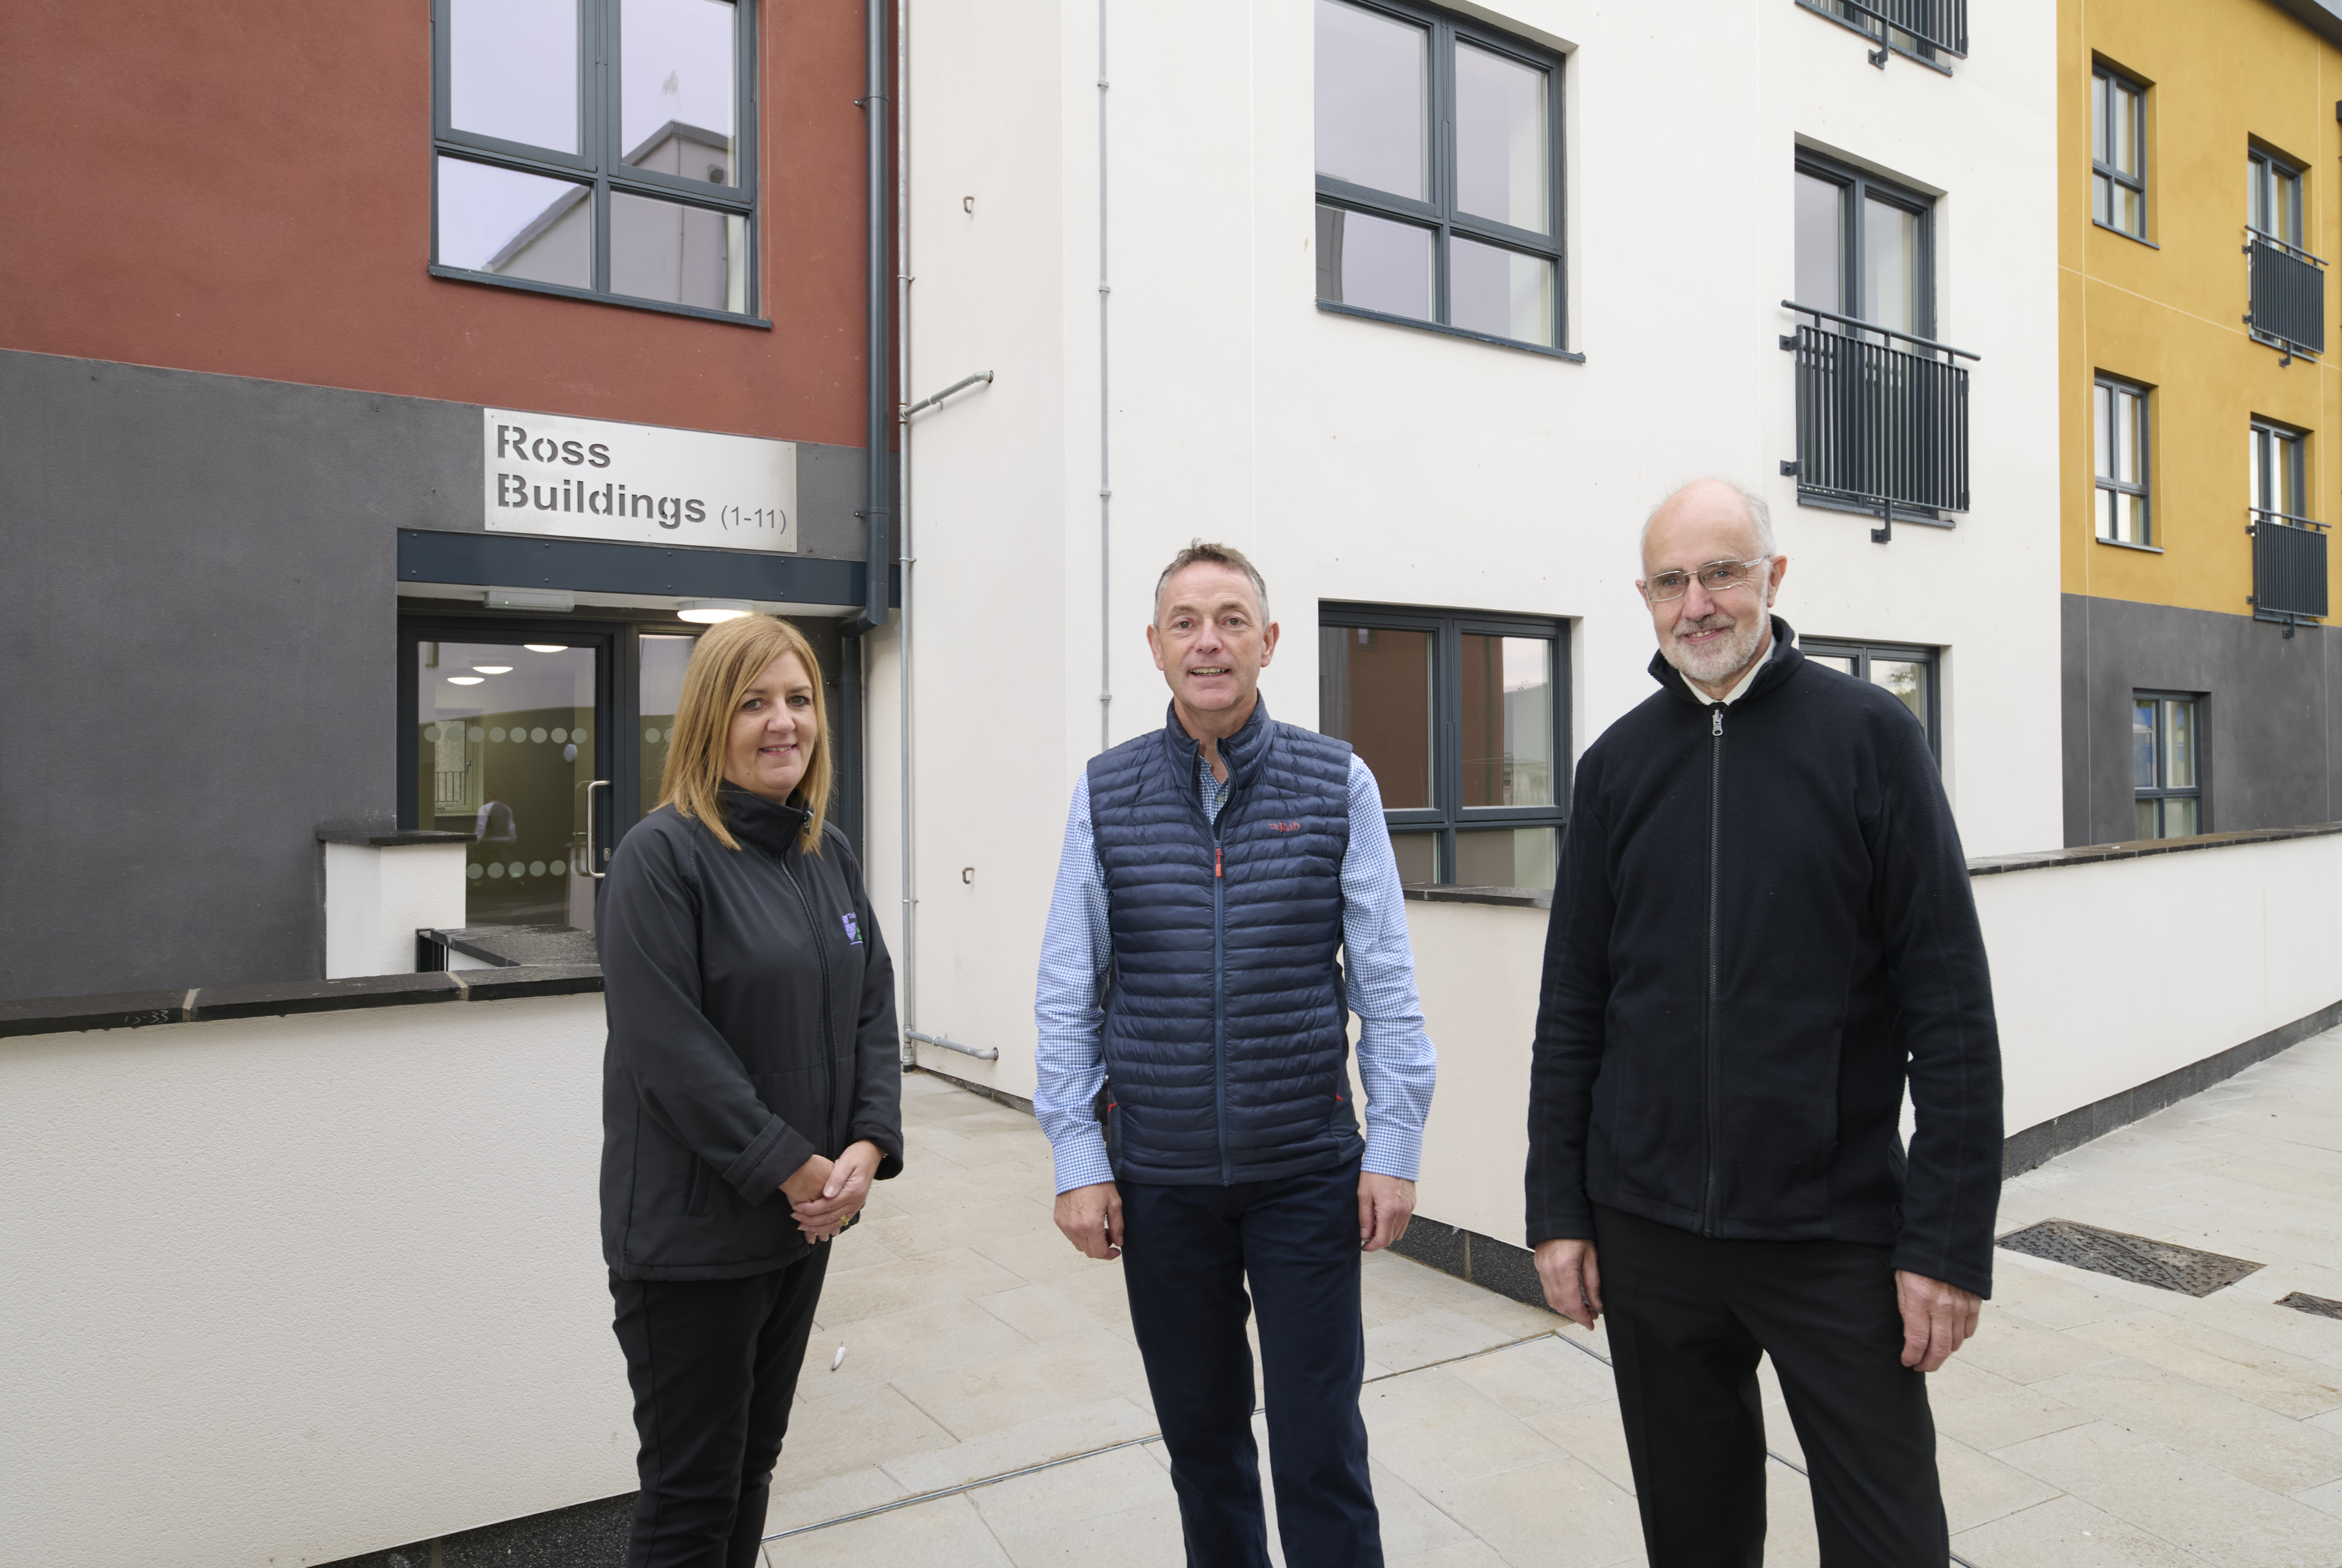 Work completed on new council homes for Dingwall